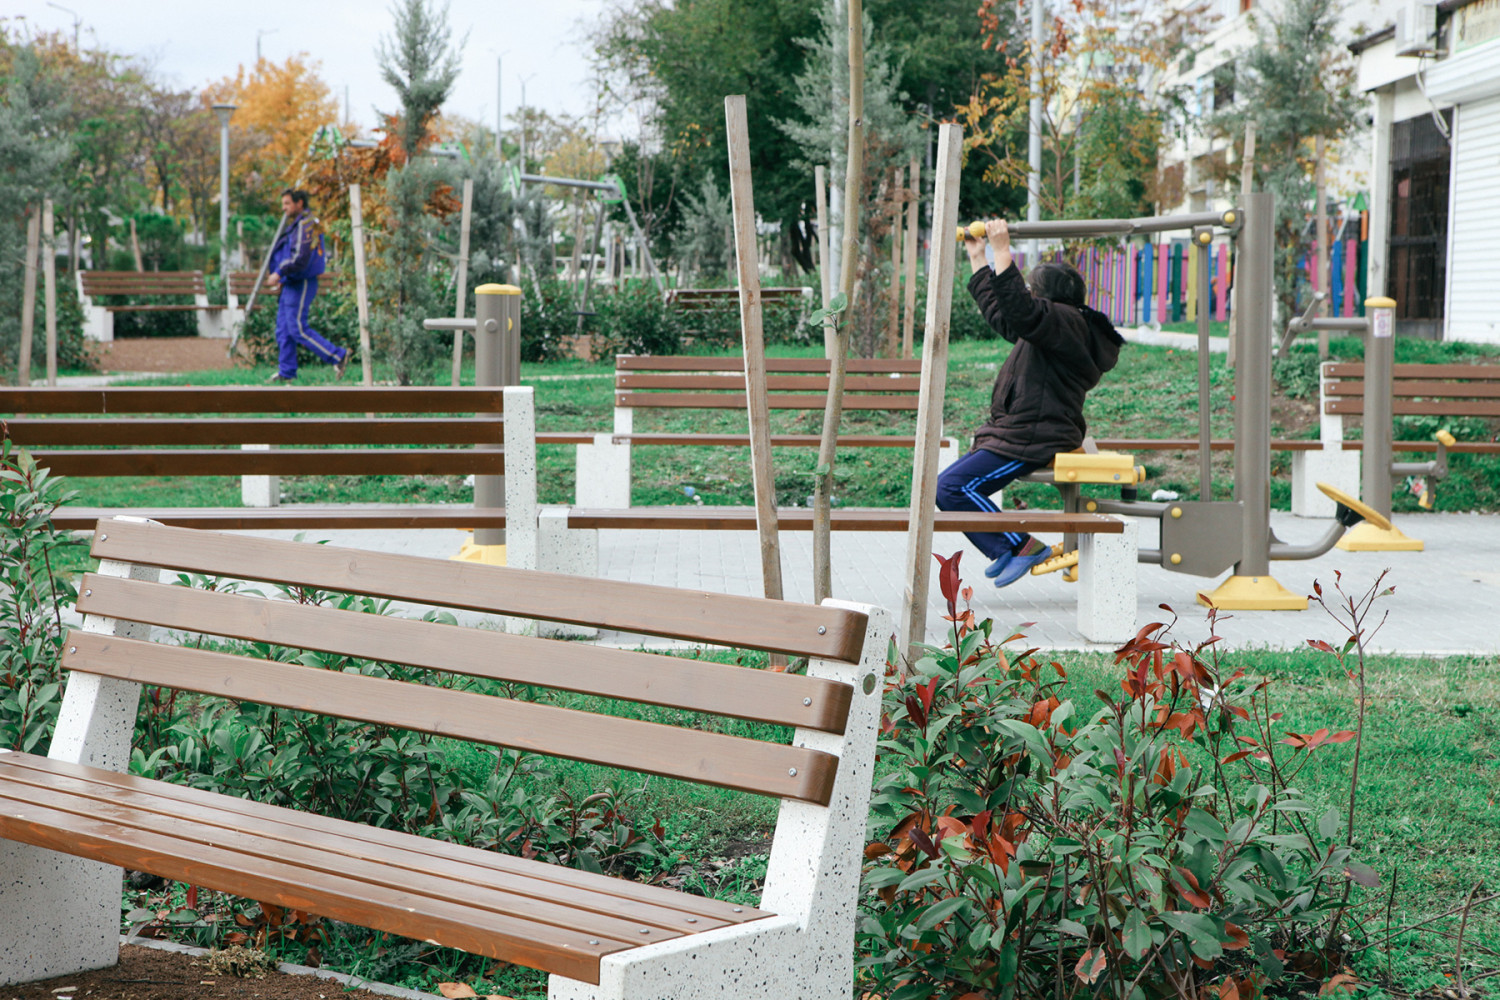 Renovation and Transformation of the Urban Environment in Meden Rudnik District, City of Burgas